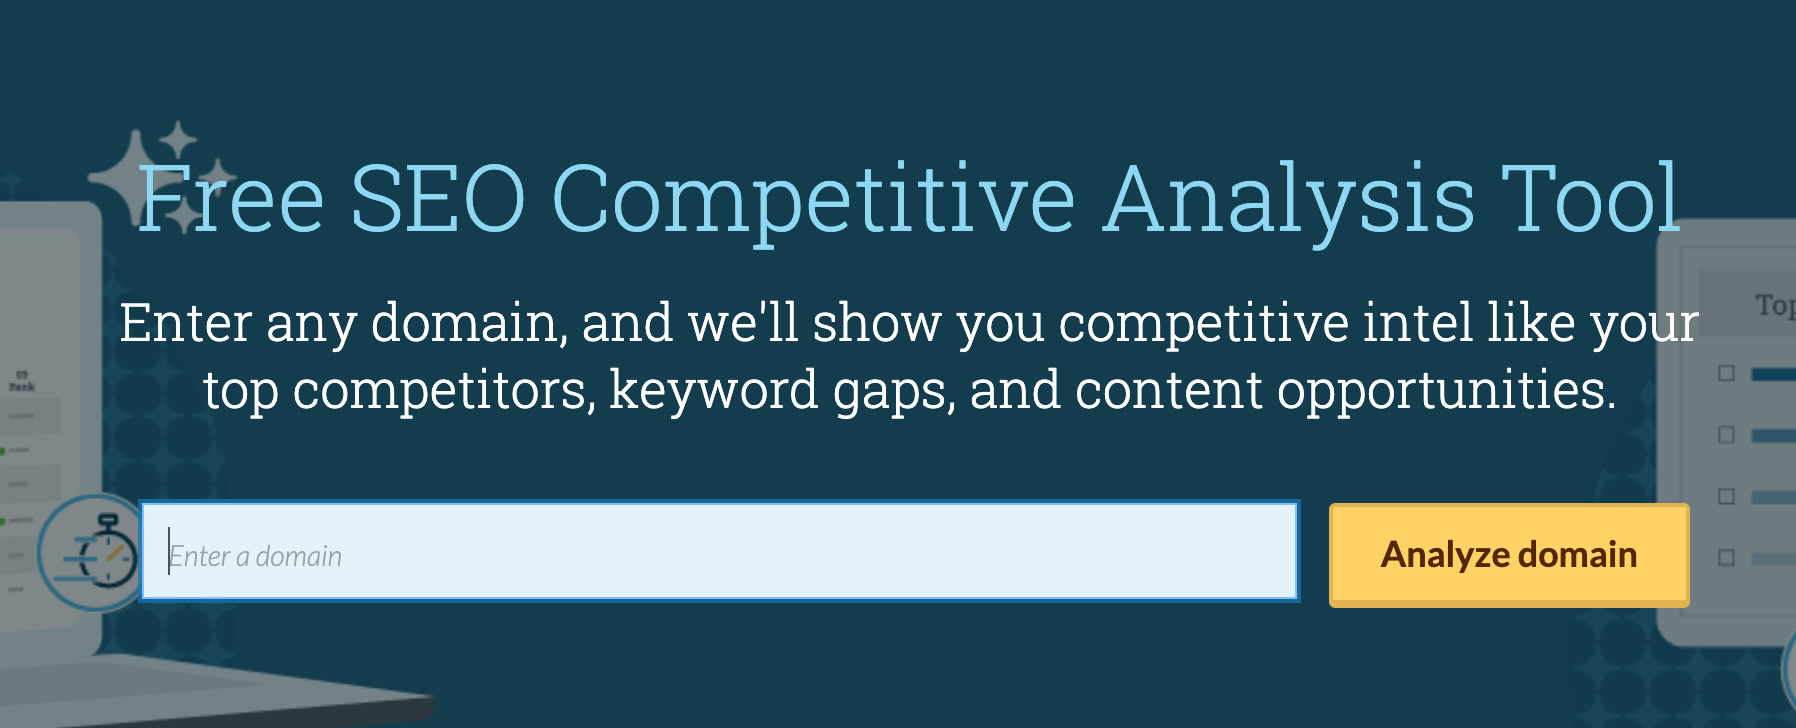 SEO for therapists websites Competitor analysis